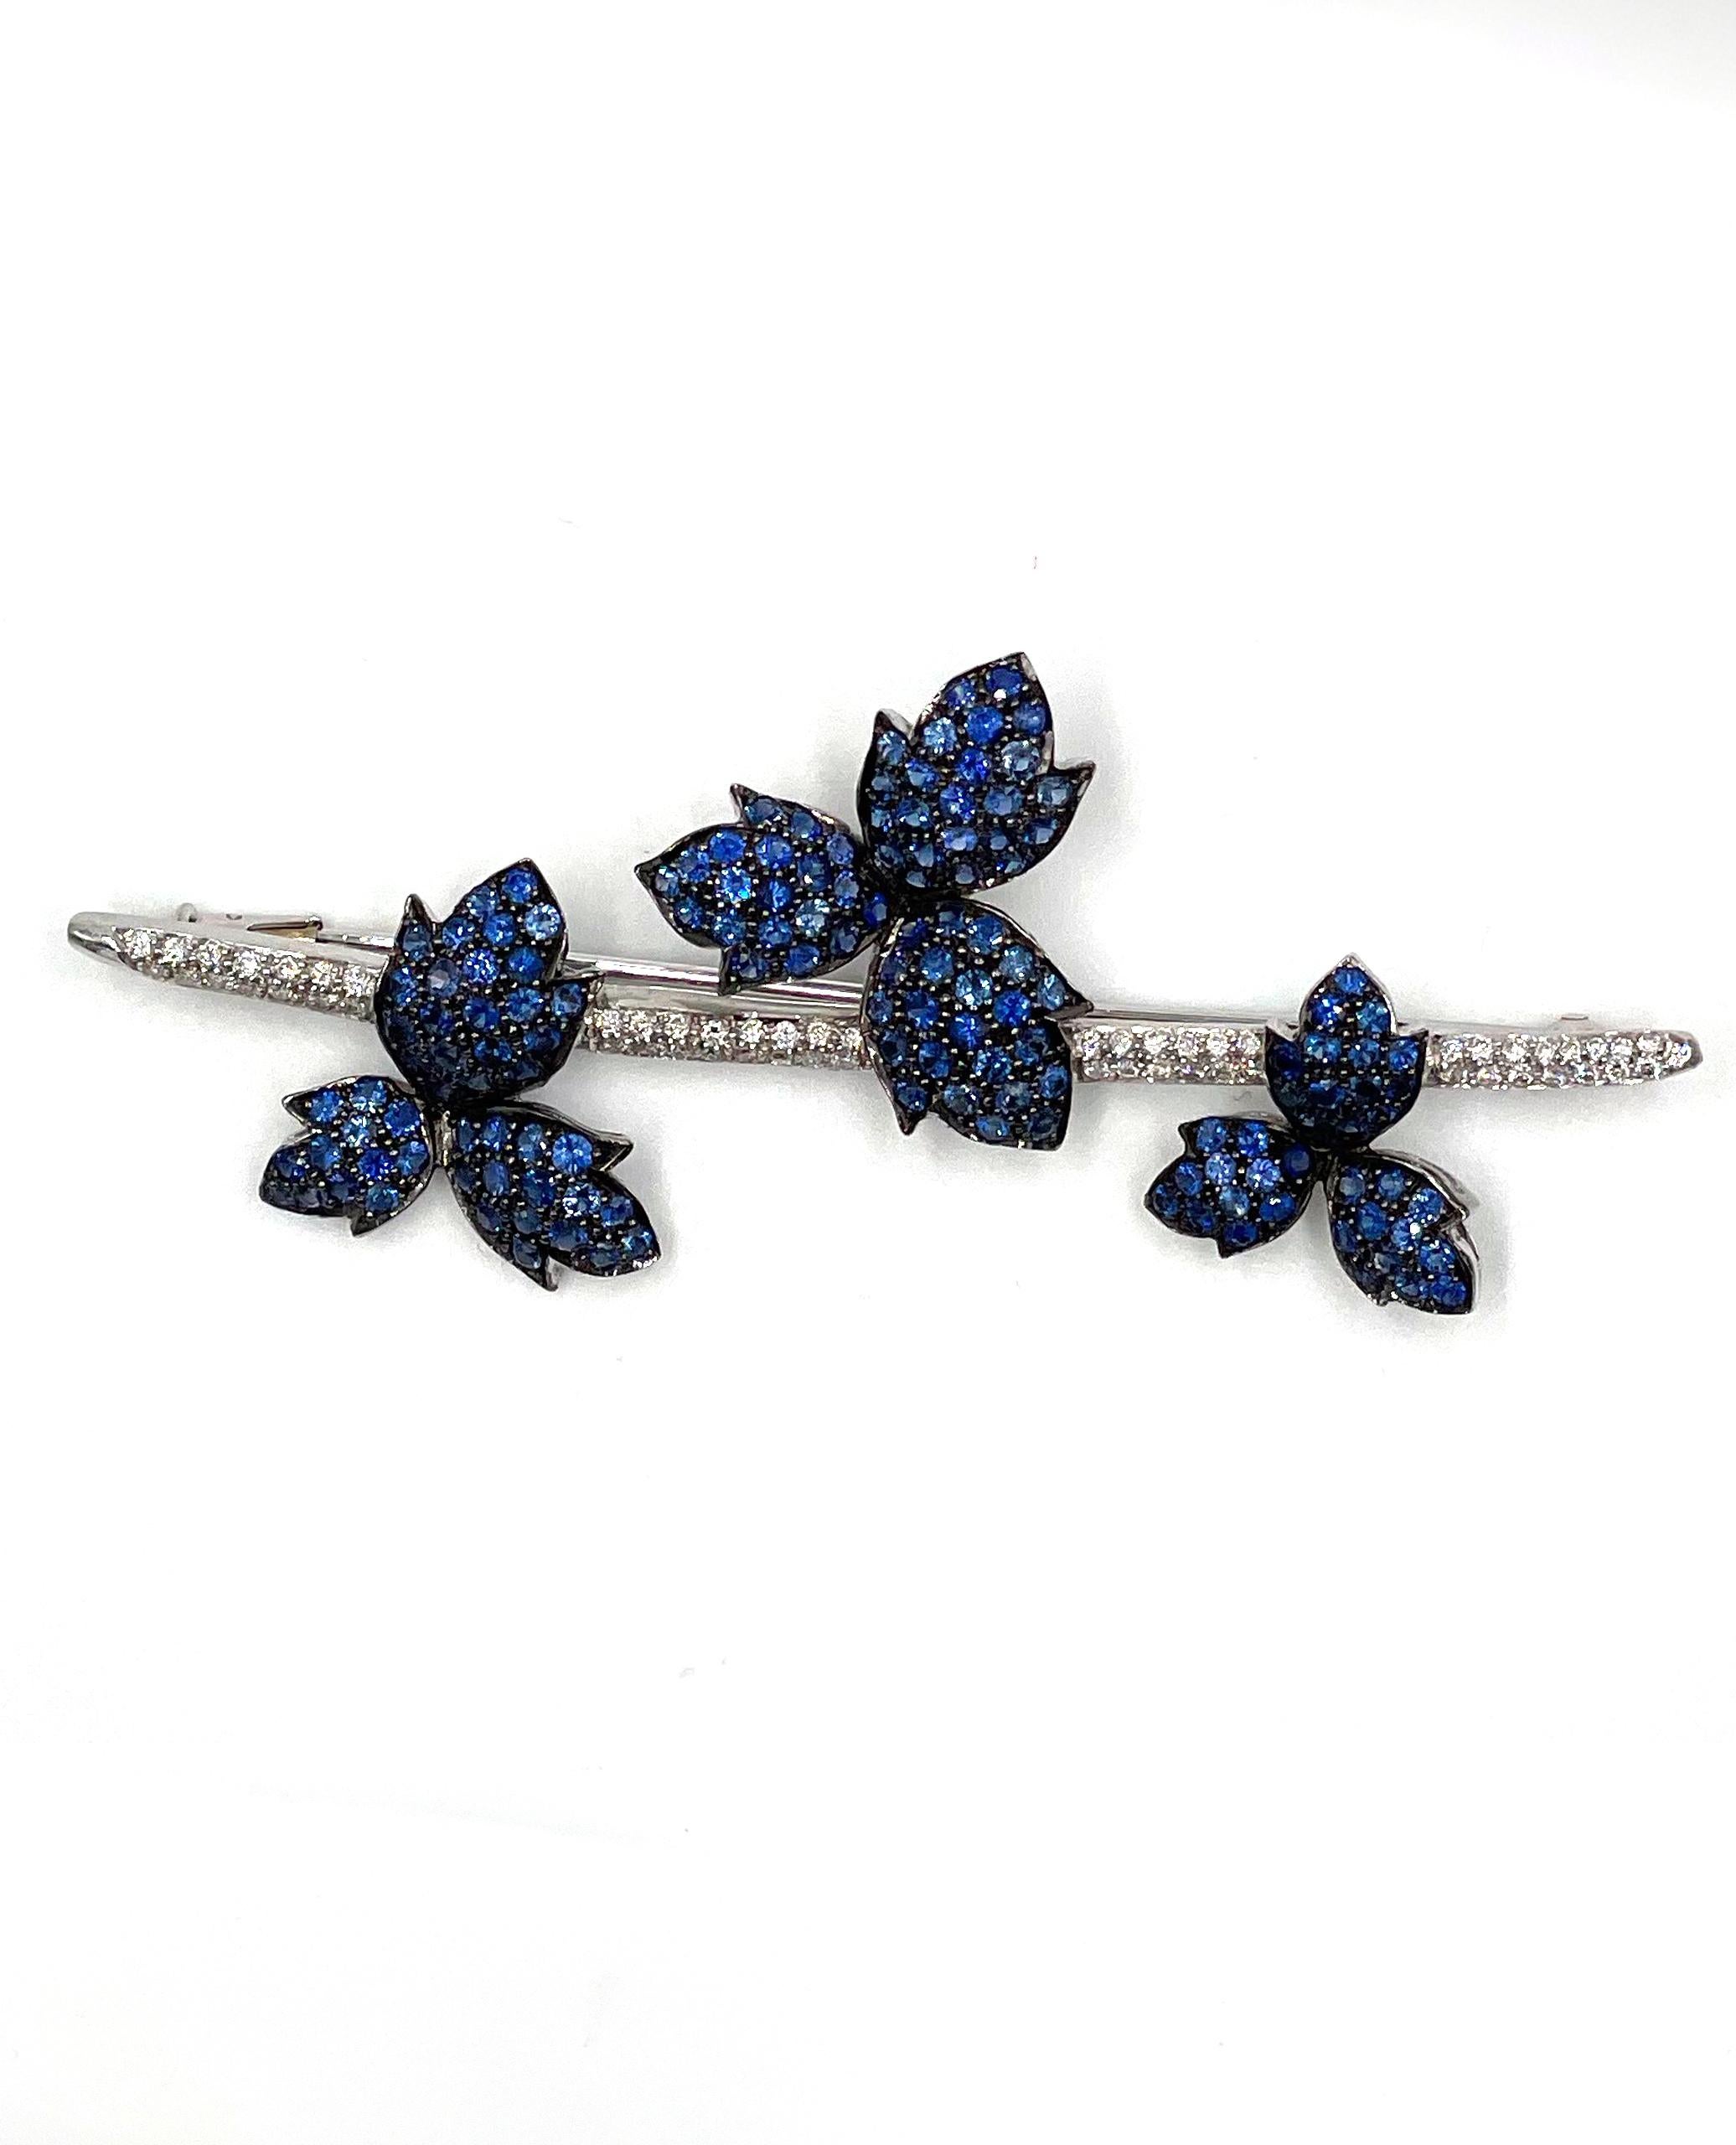 Pre owned vintage estate 18K white gold sapphire and diamond bar brooch with 58 pave set round brilliant cut diamonds approximately 0.38 carat total weight.  The brooch has a three leaf/floral clusters.  They are blackened white gold and bead set